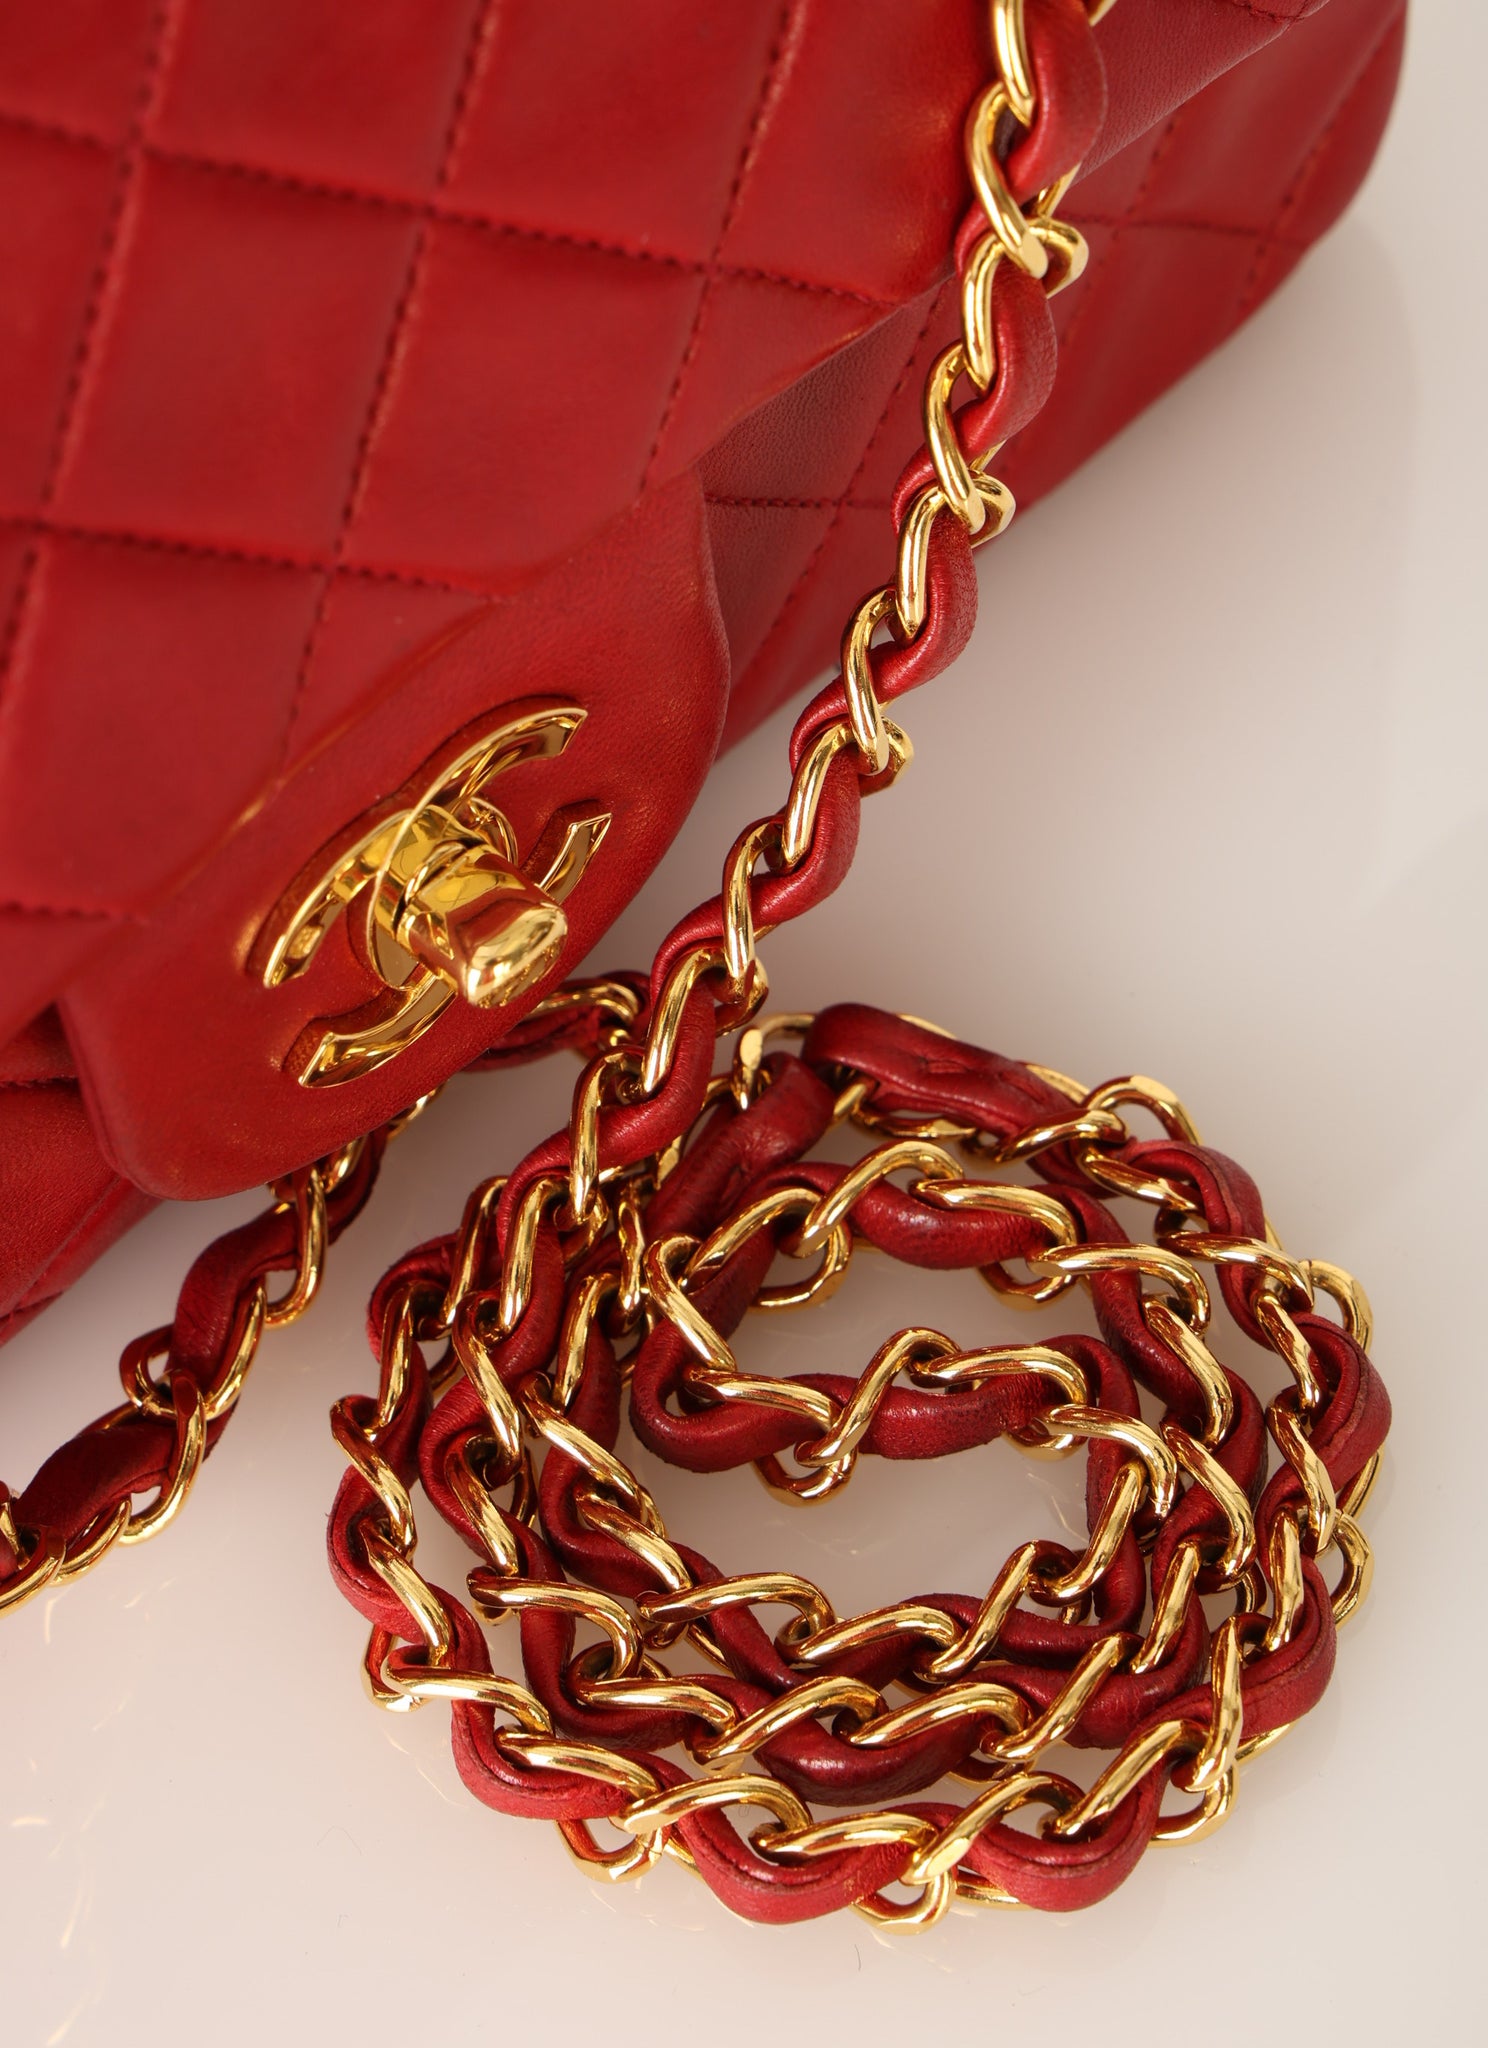 Chanel 1991 Lambskin Small Red Double Flap